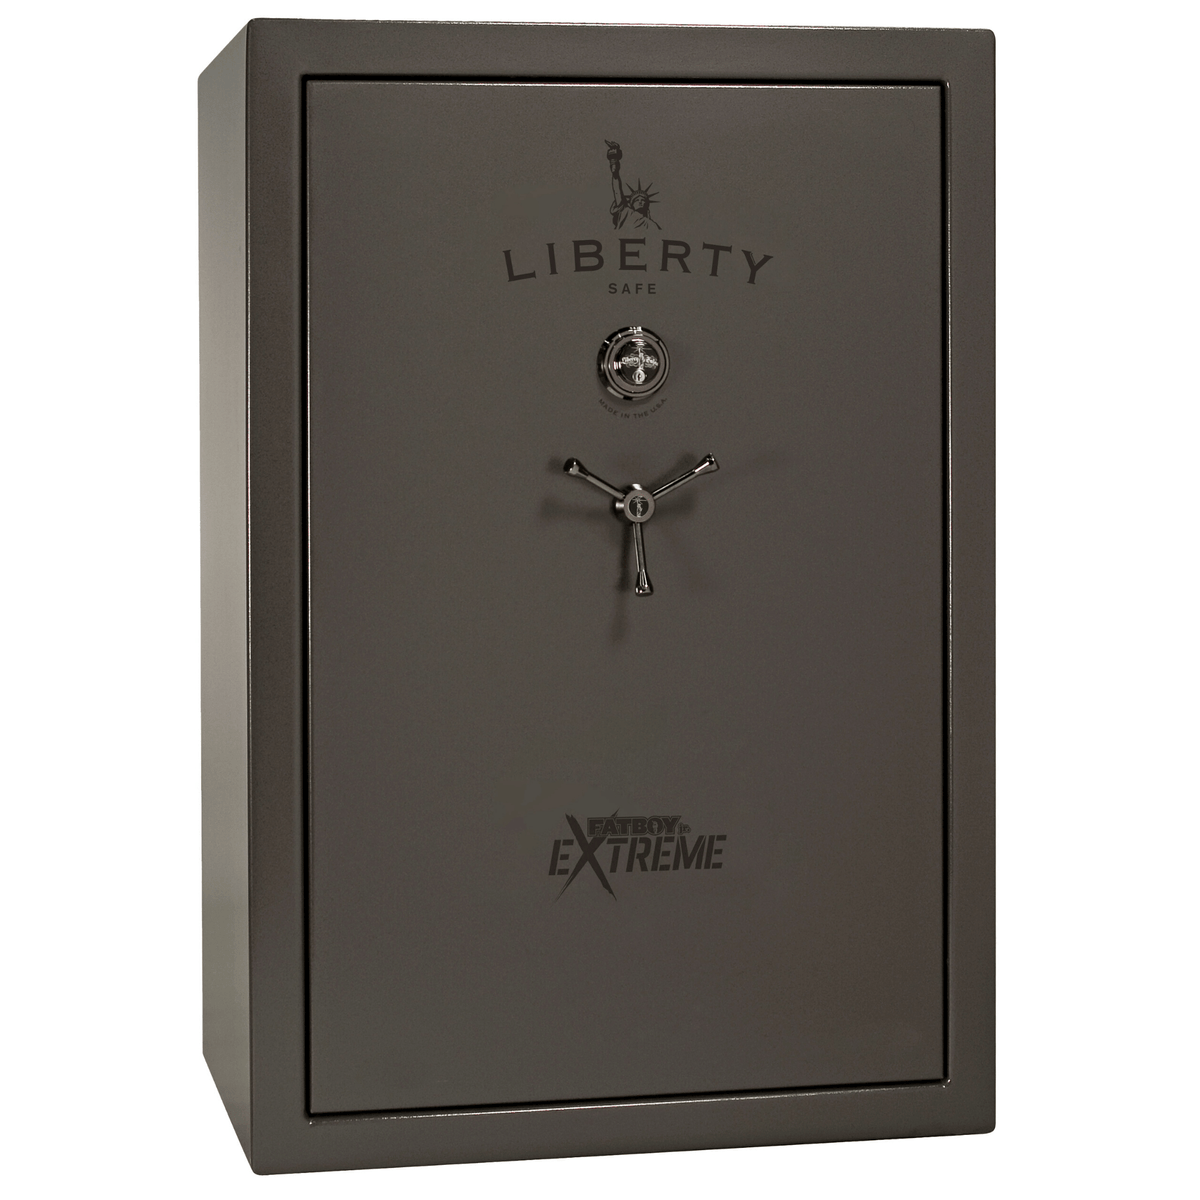 Fatboy Junior Extreme Safe in Gray Marble with Black Chrome Mechanical Lock.